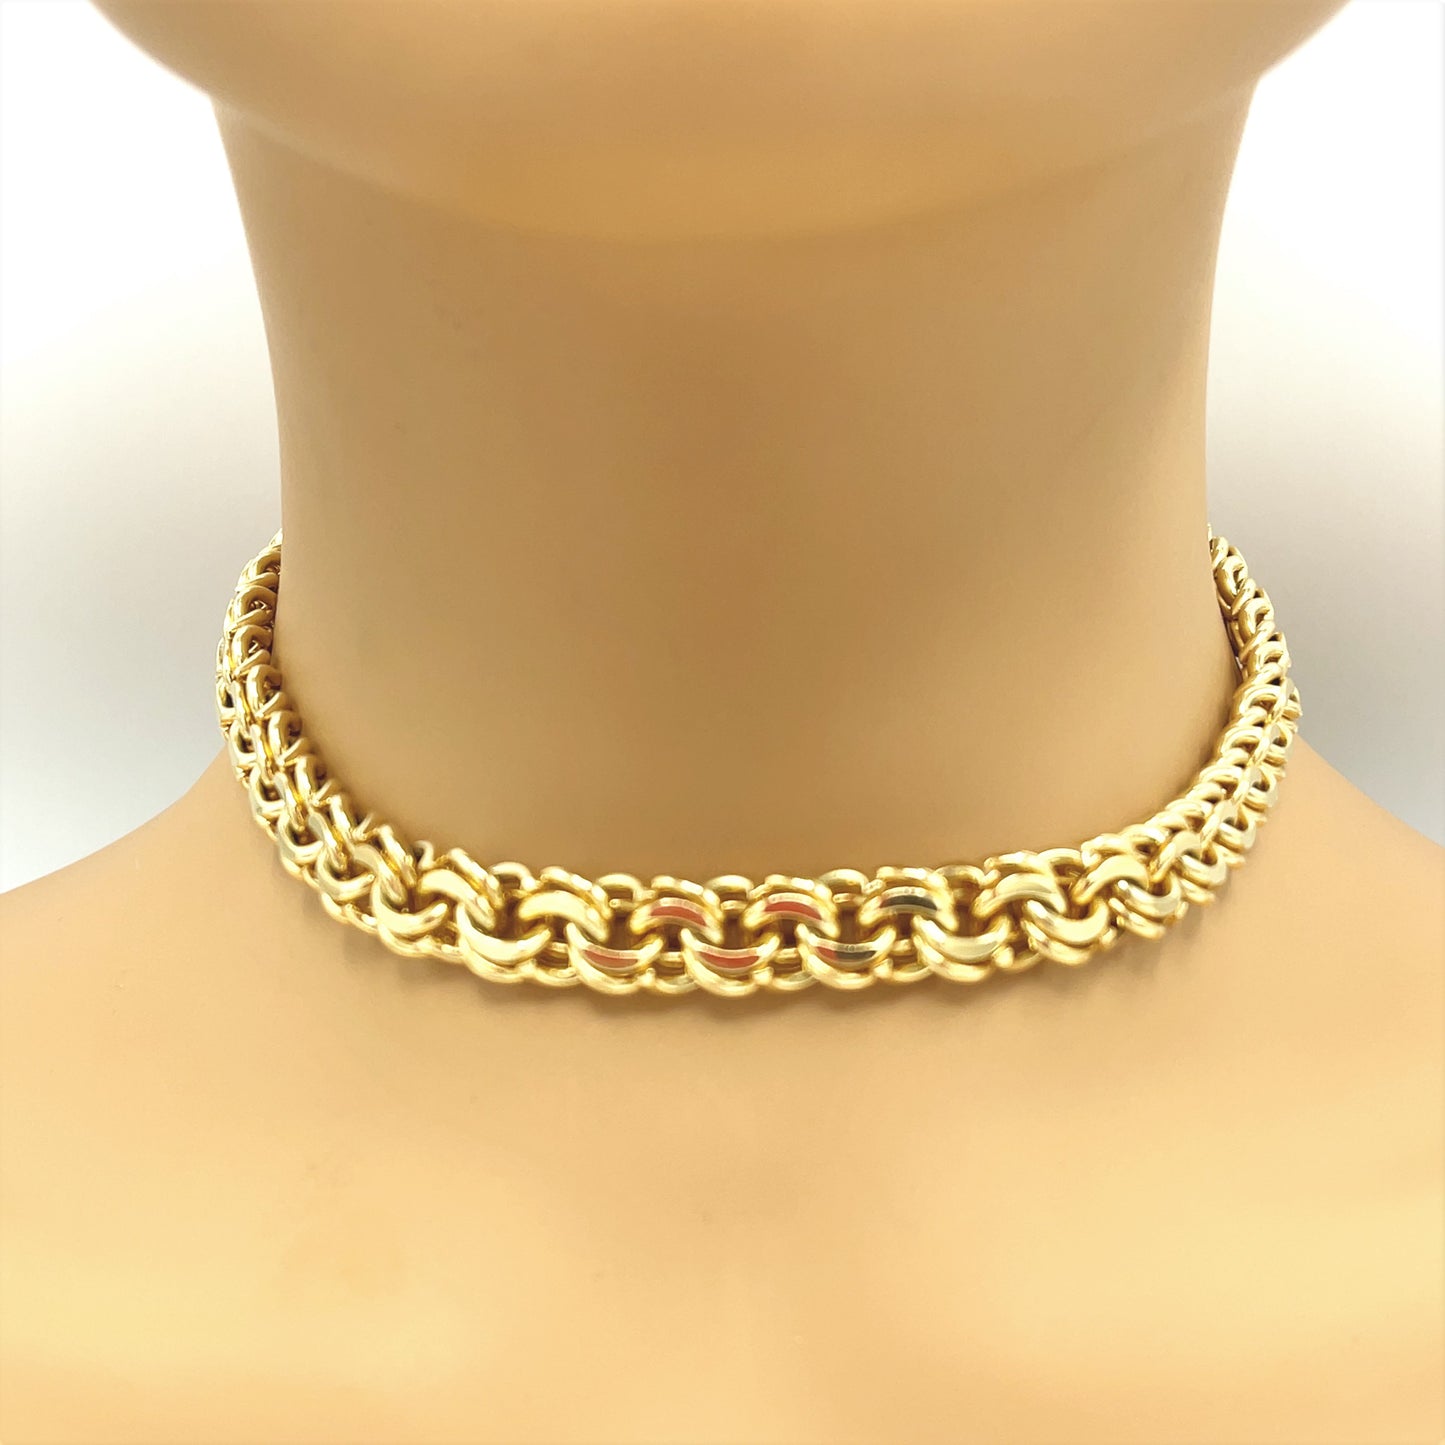 Tiffany and Co. 10 mm wide Chain Link Necklace